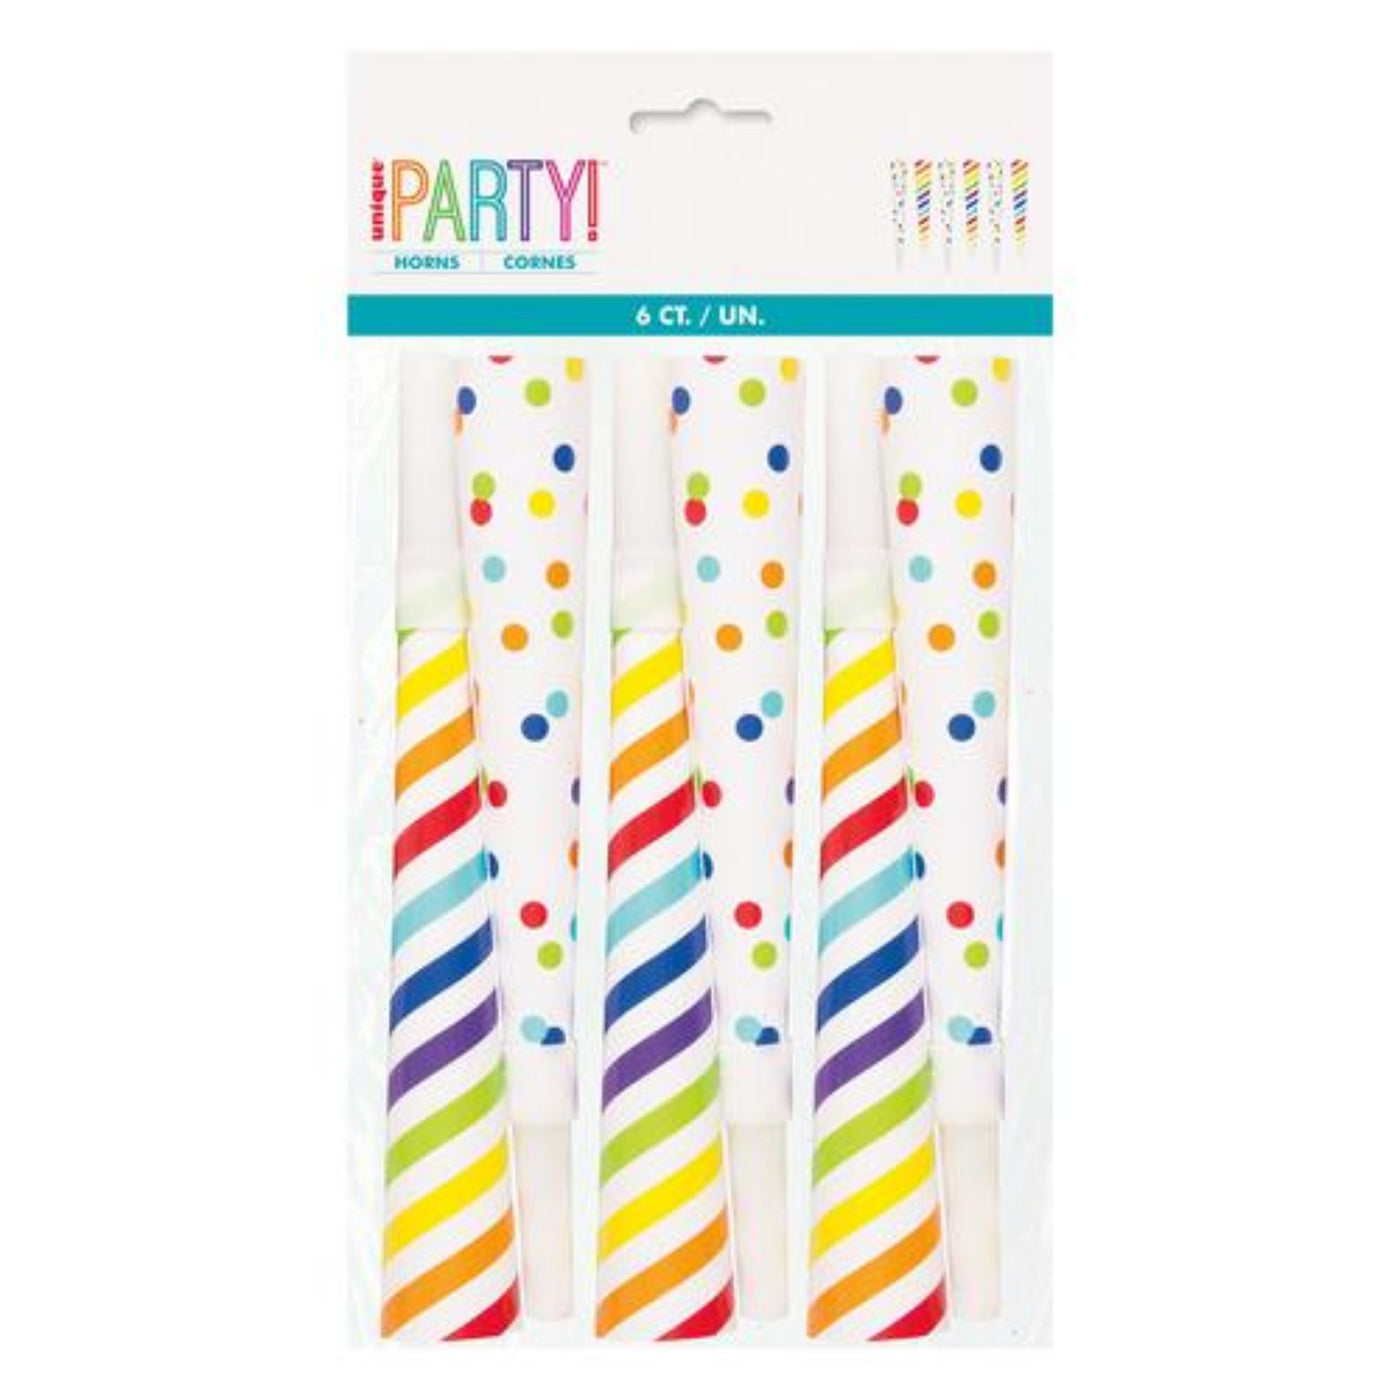 Dotted and Striped Party Horns